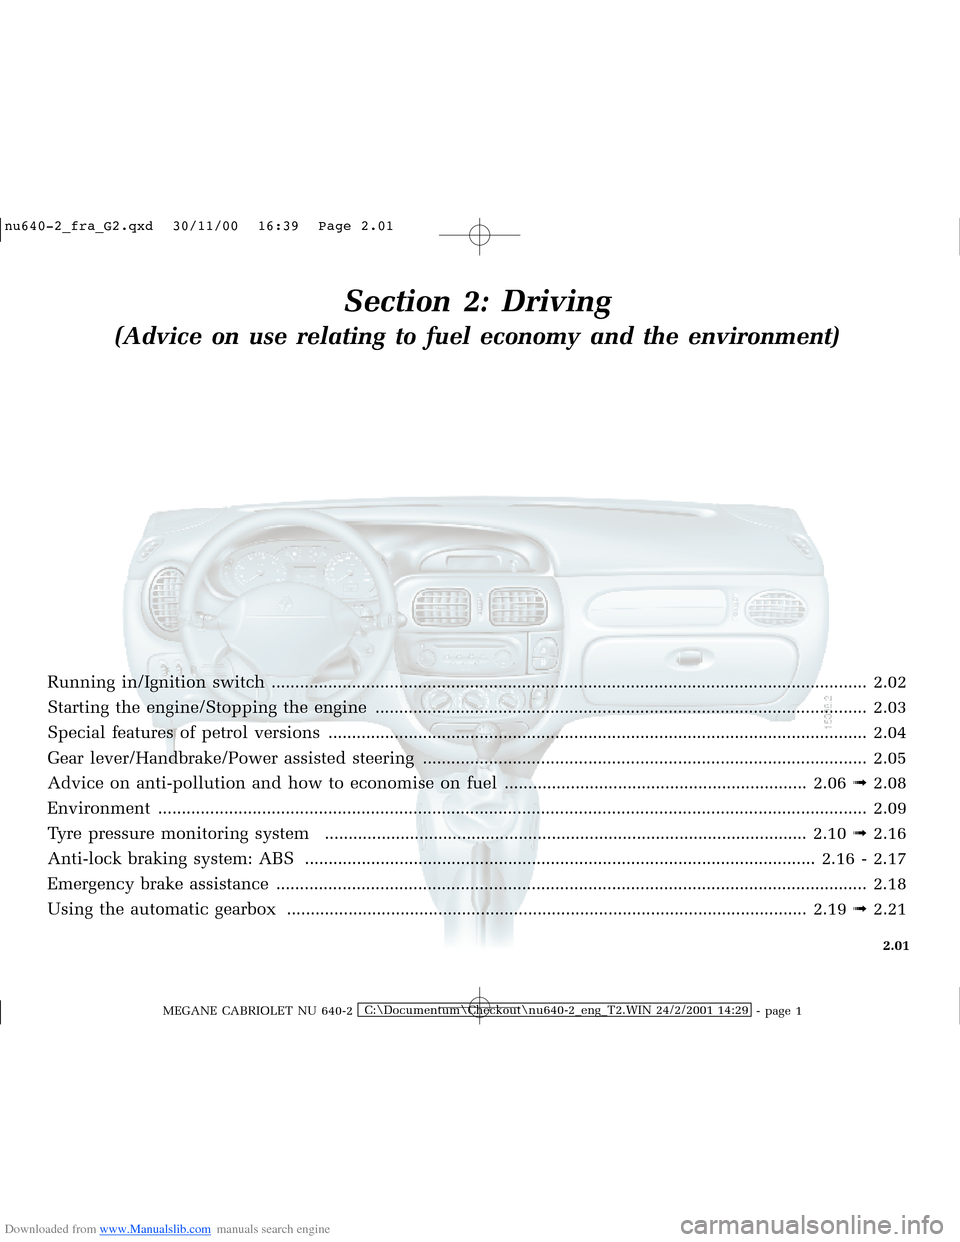 RENAULT MEGANE 2000 X64 / 1.G Owners Manual Downloaded from www.Manualslib.com manuals search engine �Q�X������B�I�U�D�B�*���T�[�G� � ��������� � ������ � �3�D�J�H� ����
MEGANE CABRIOLET NU 640-2C:\Documentum\Chec